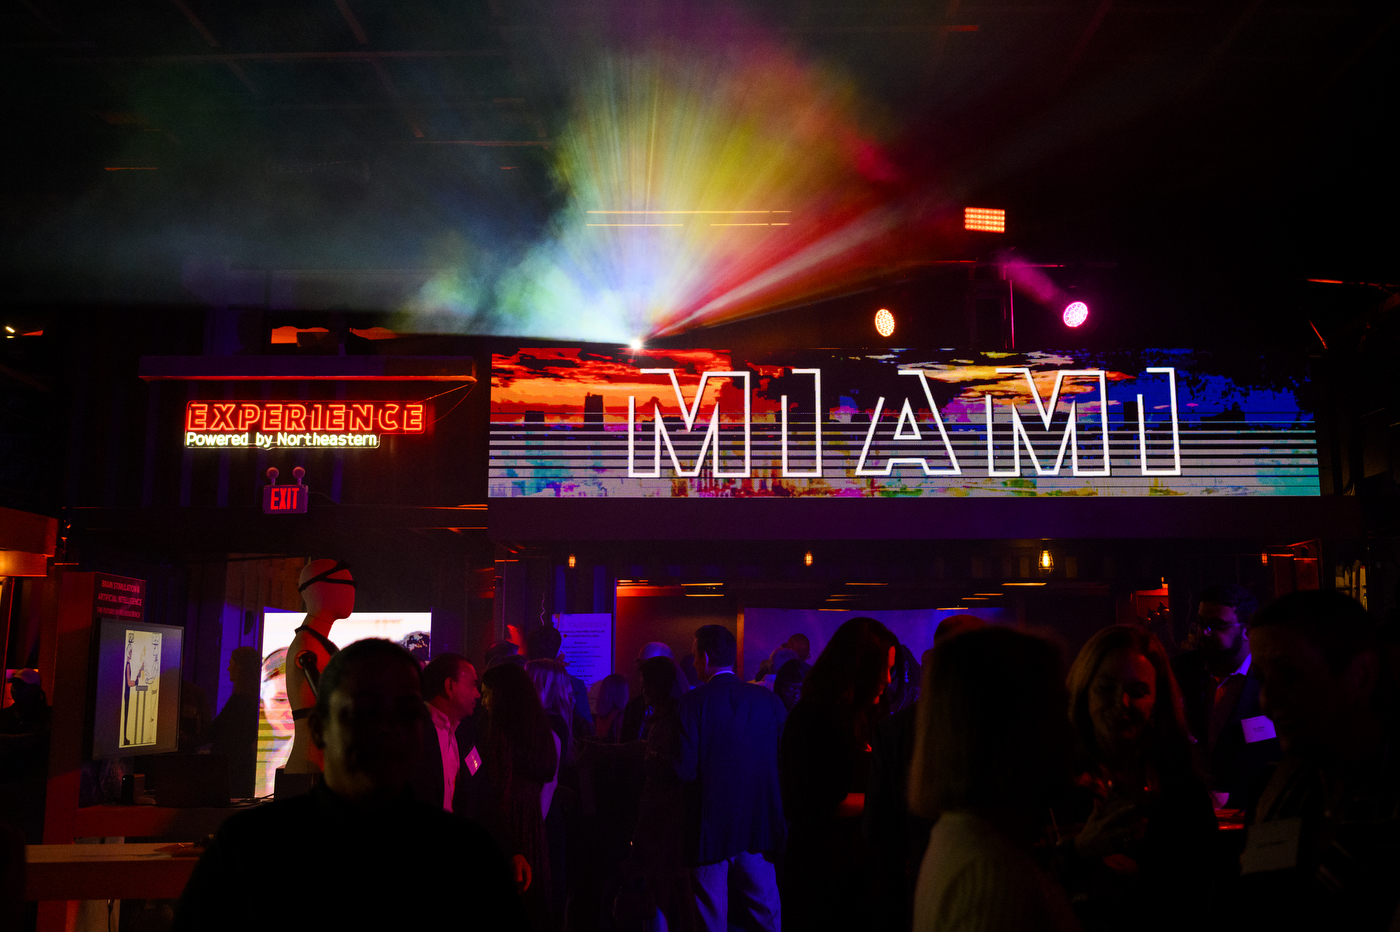 The word 'Miami' is illuminated in multi-colored lights